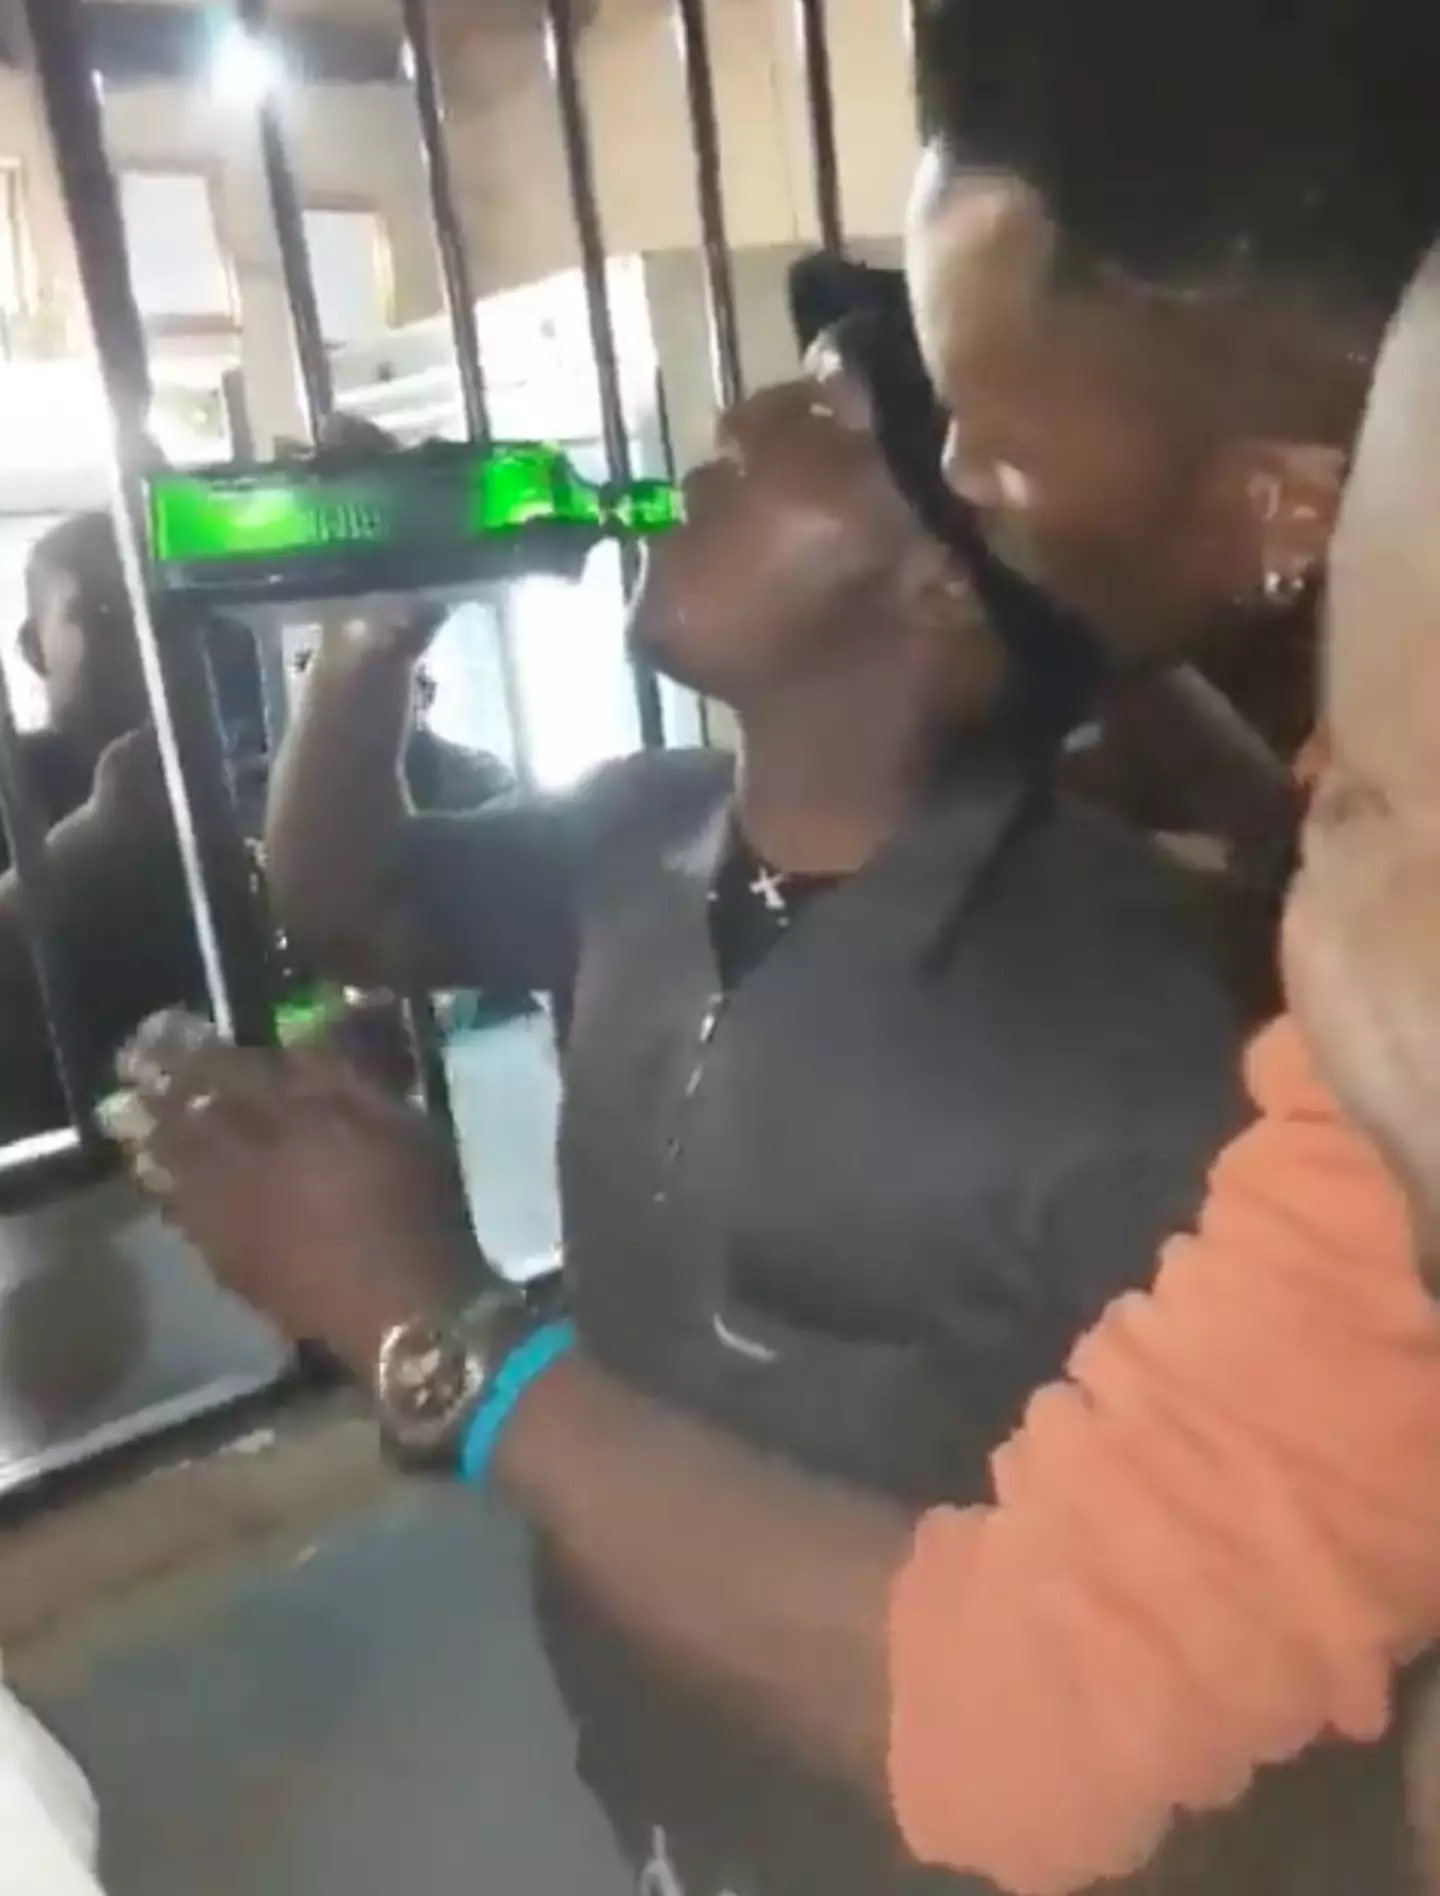 A video shared on social media shows the man downing the bottle of Jaegermeister.